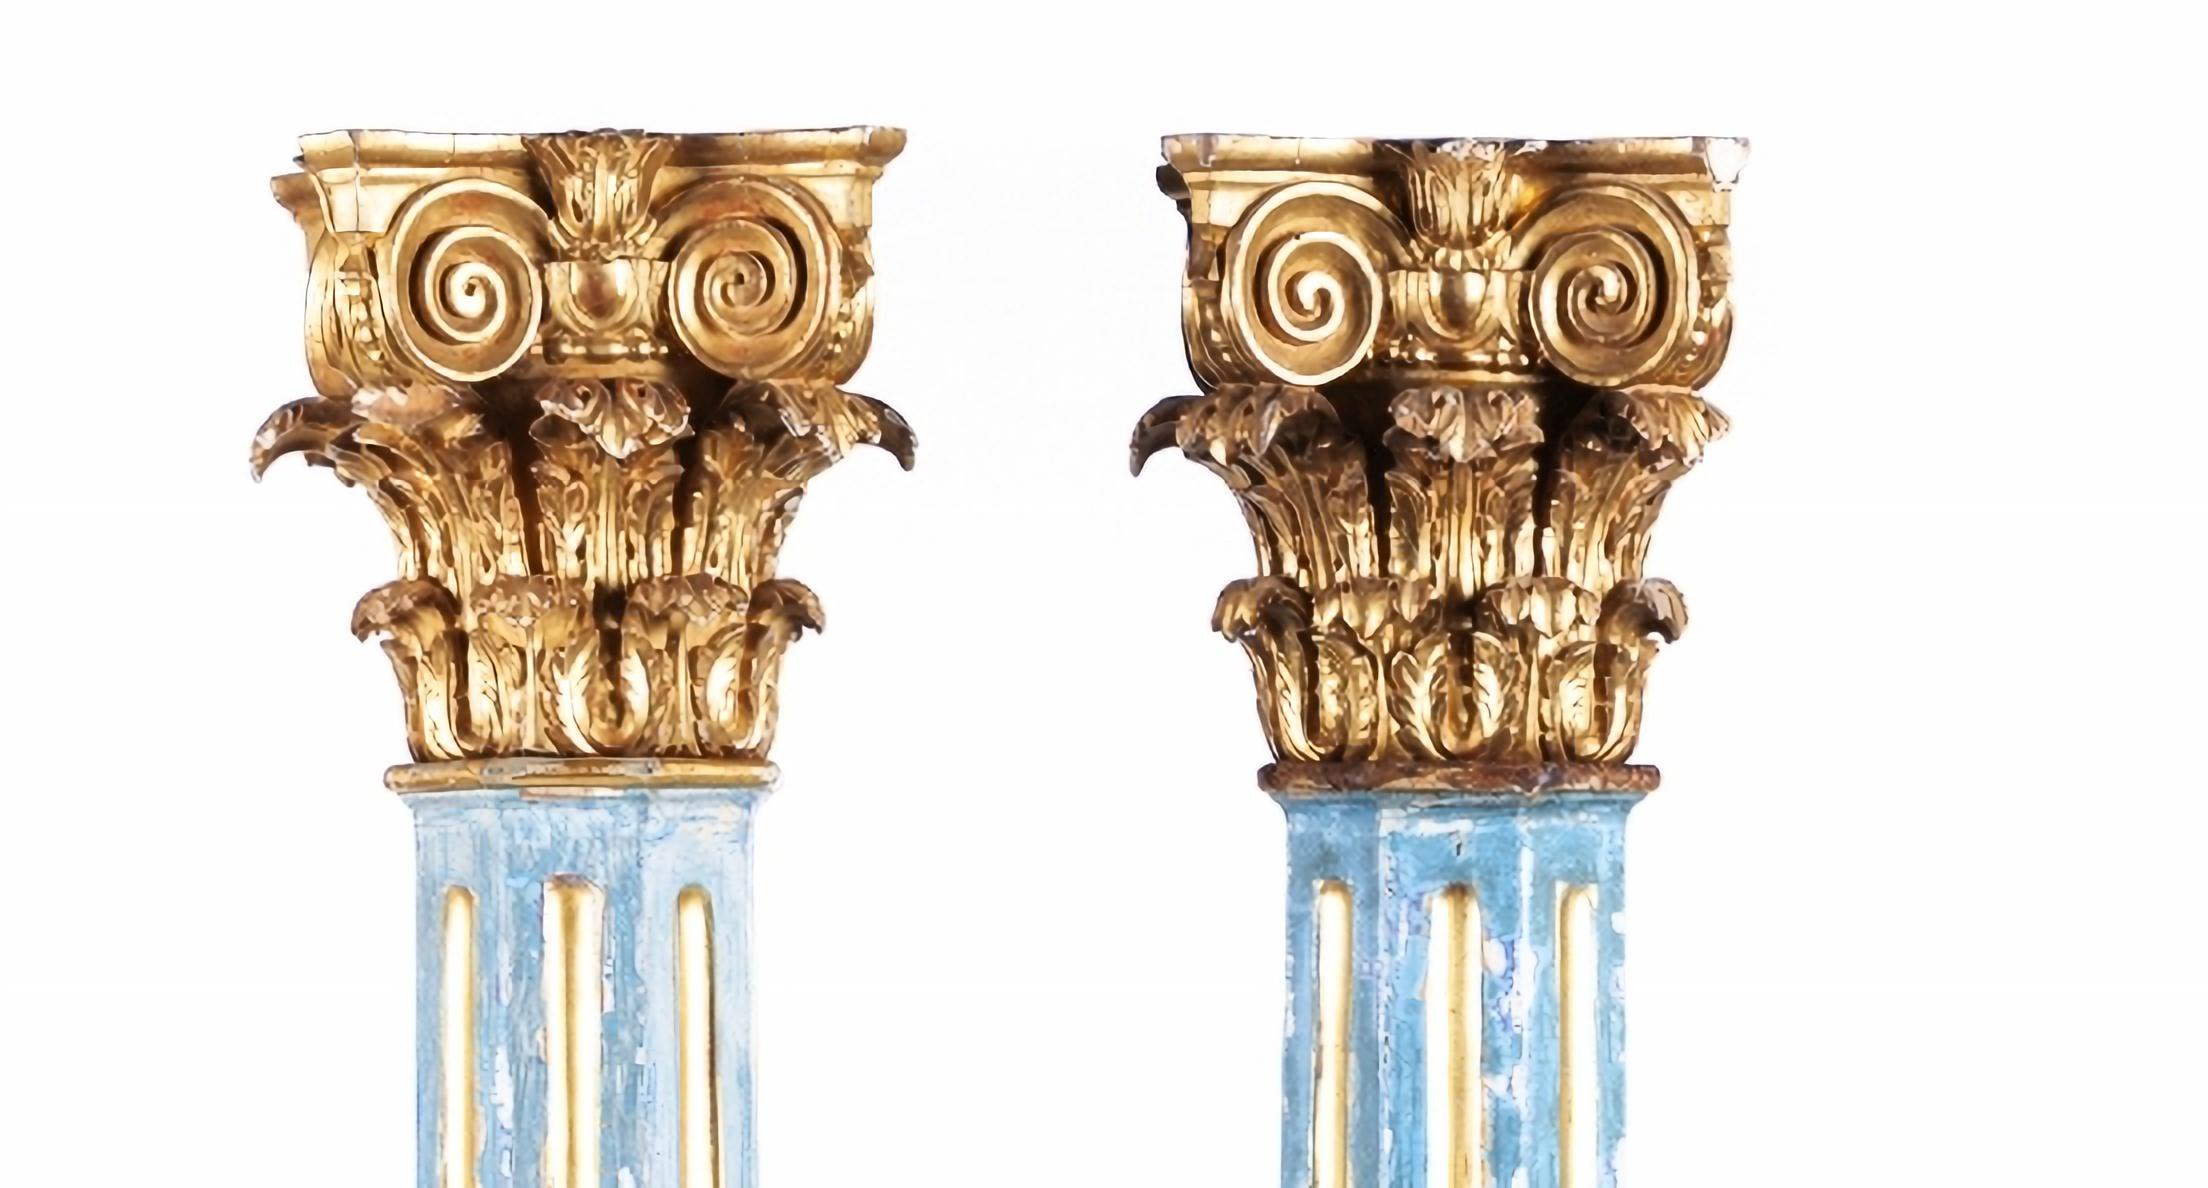 Pair of Spanish columns
18th century
In carved wood, painted and gilded.
Minor glitches. Dimensions: Height: 184 cm.